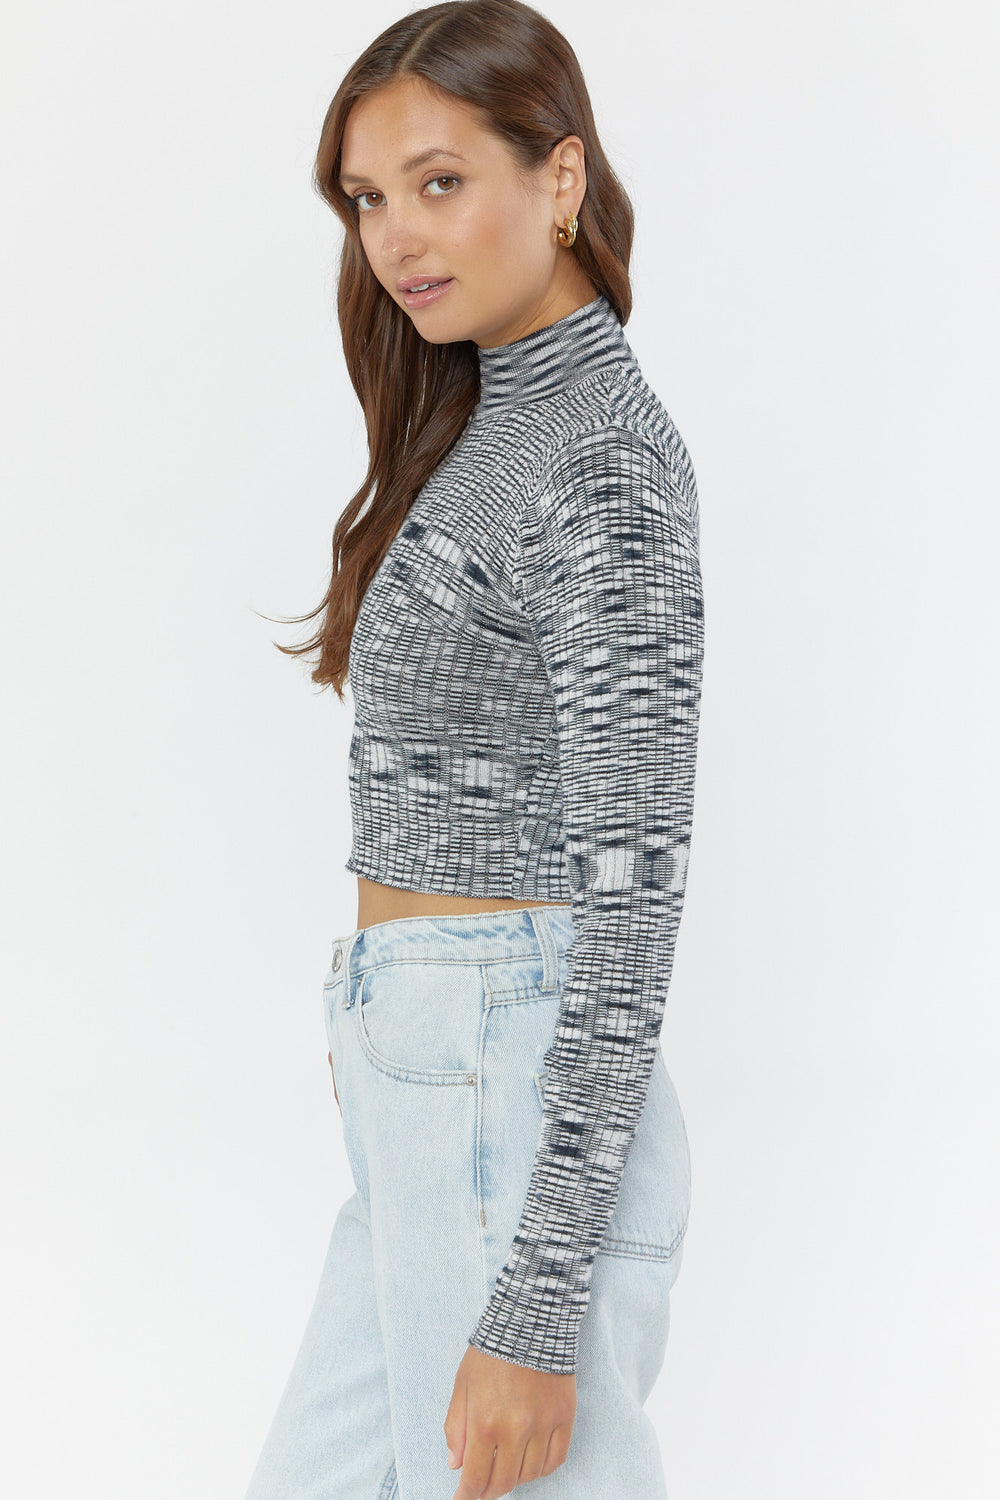 Ribbed Mock-Neck Sweater Top Black with White